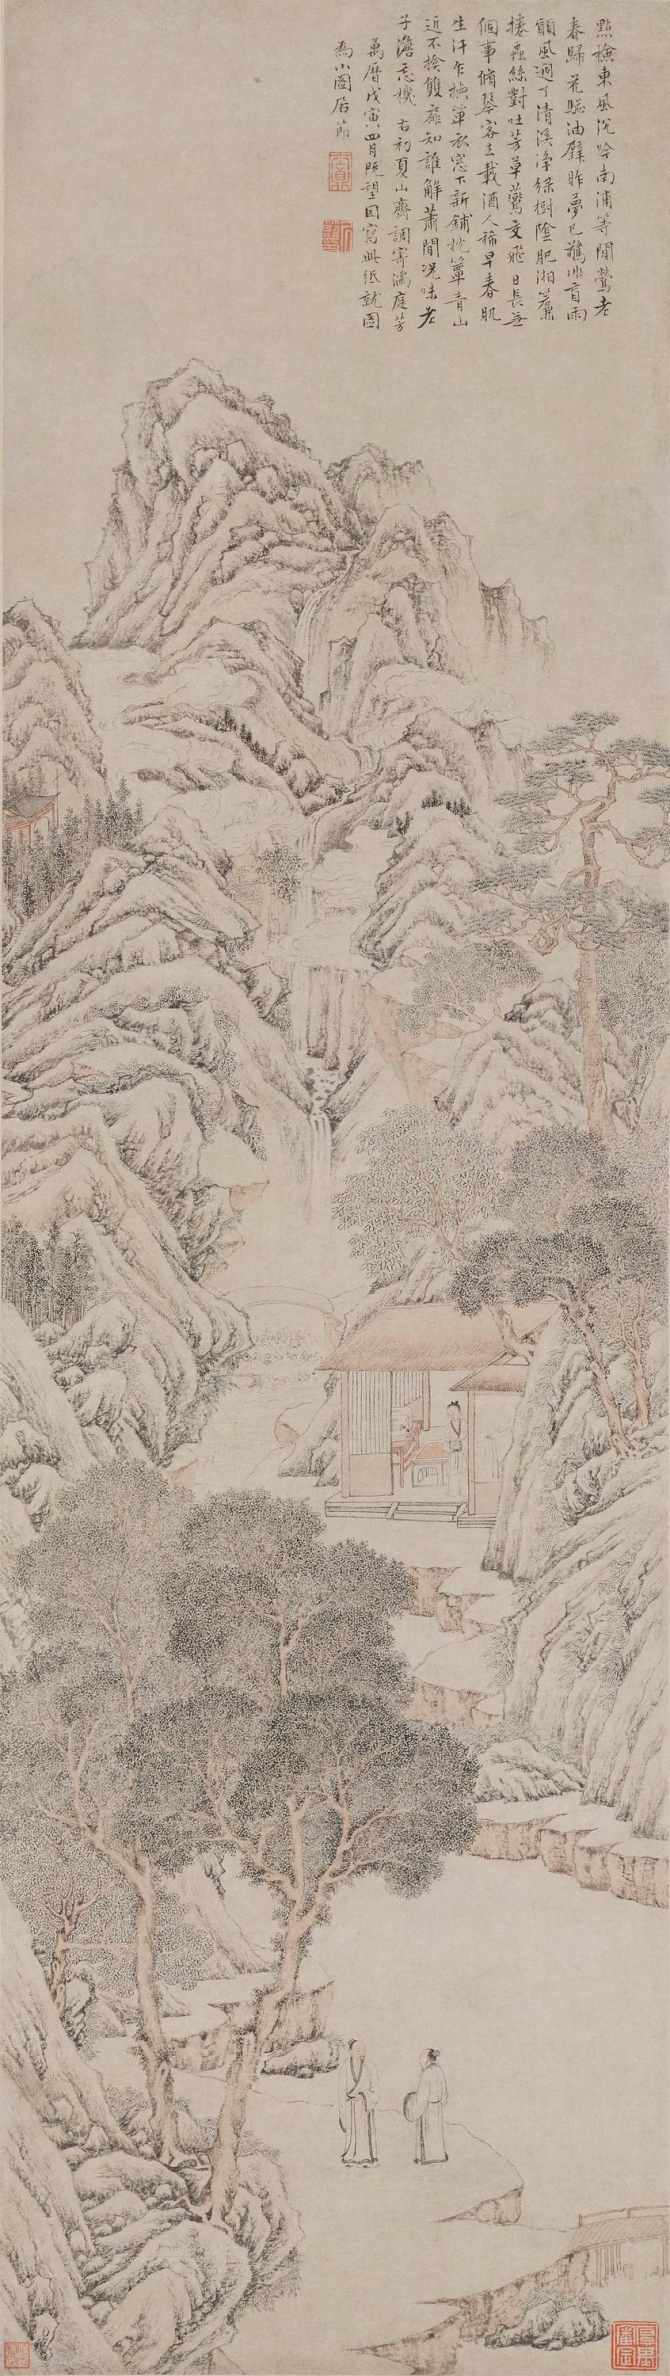 Image of "Mountain Retreat in Early Summer"